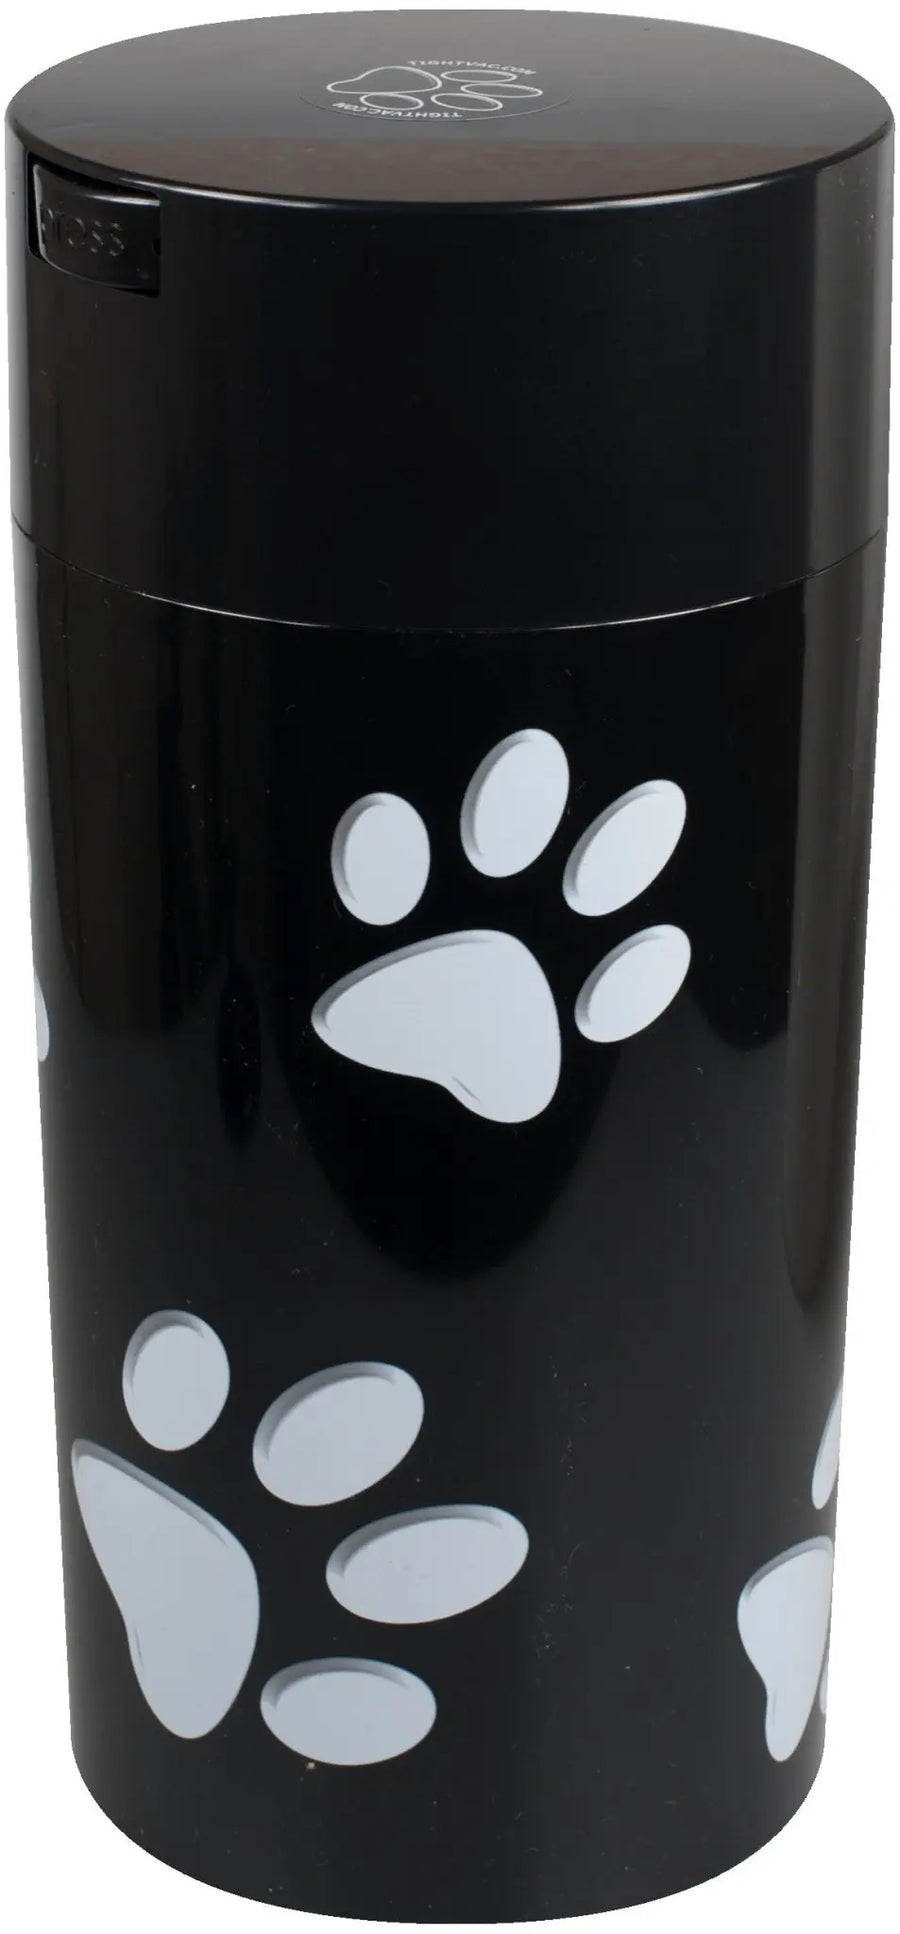 Tightvac PAWVAC 2,35 liter / 680g / Solid / White Paws / Black - TightVac Europe - The eassiest storage solutions